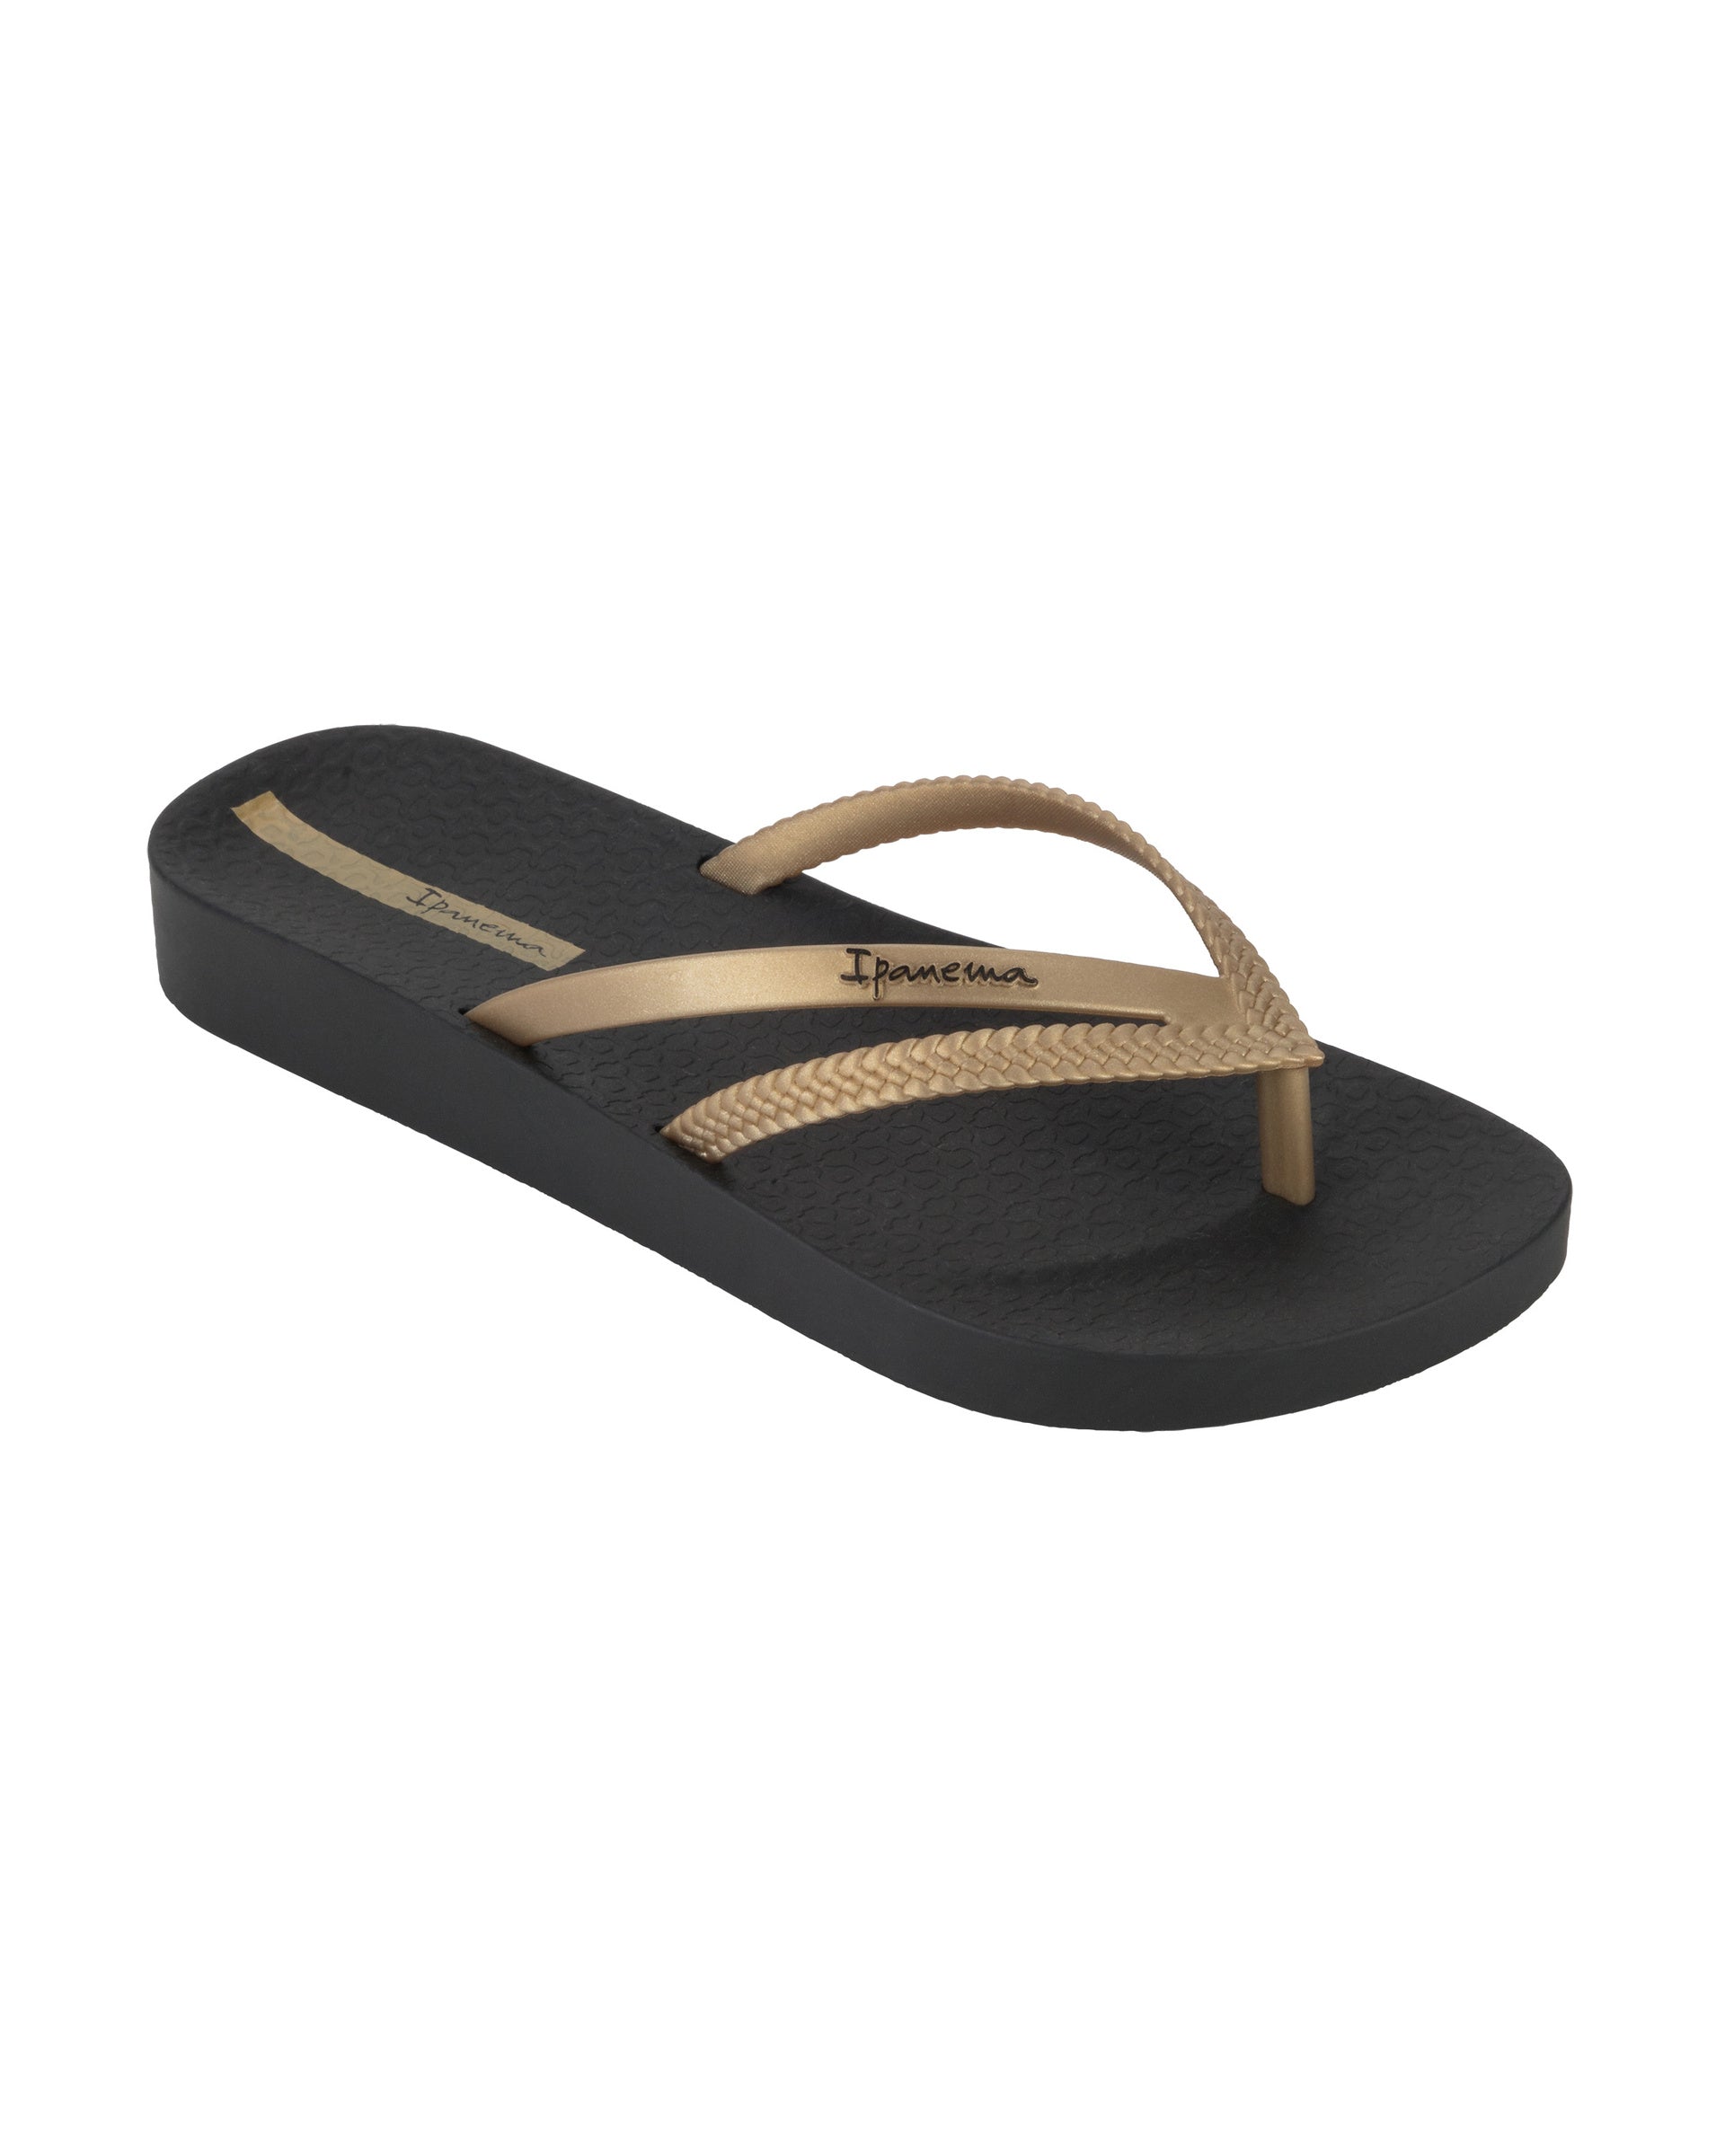 Angled view of a black Ipanema Bossa Soft women's flip flop with metallic gold straps.